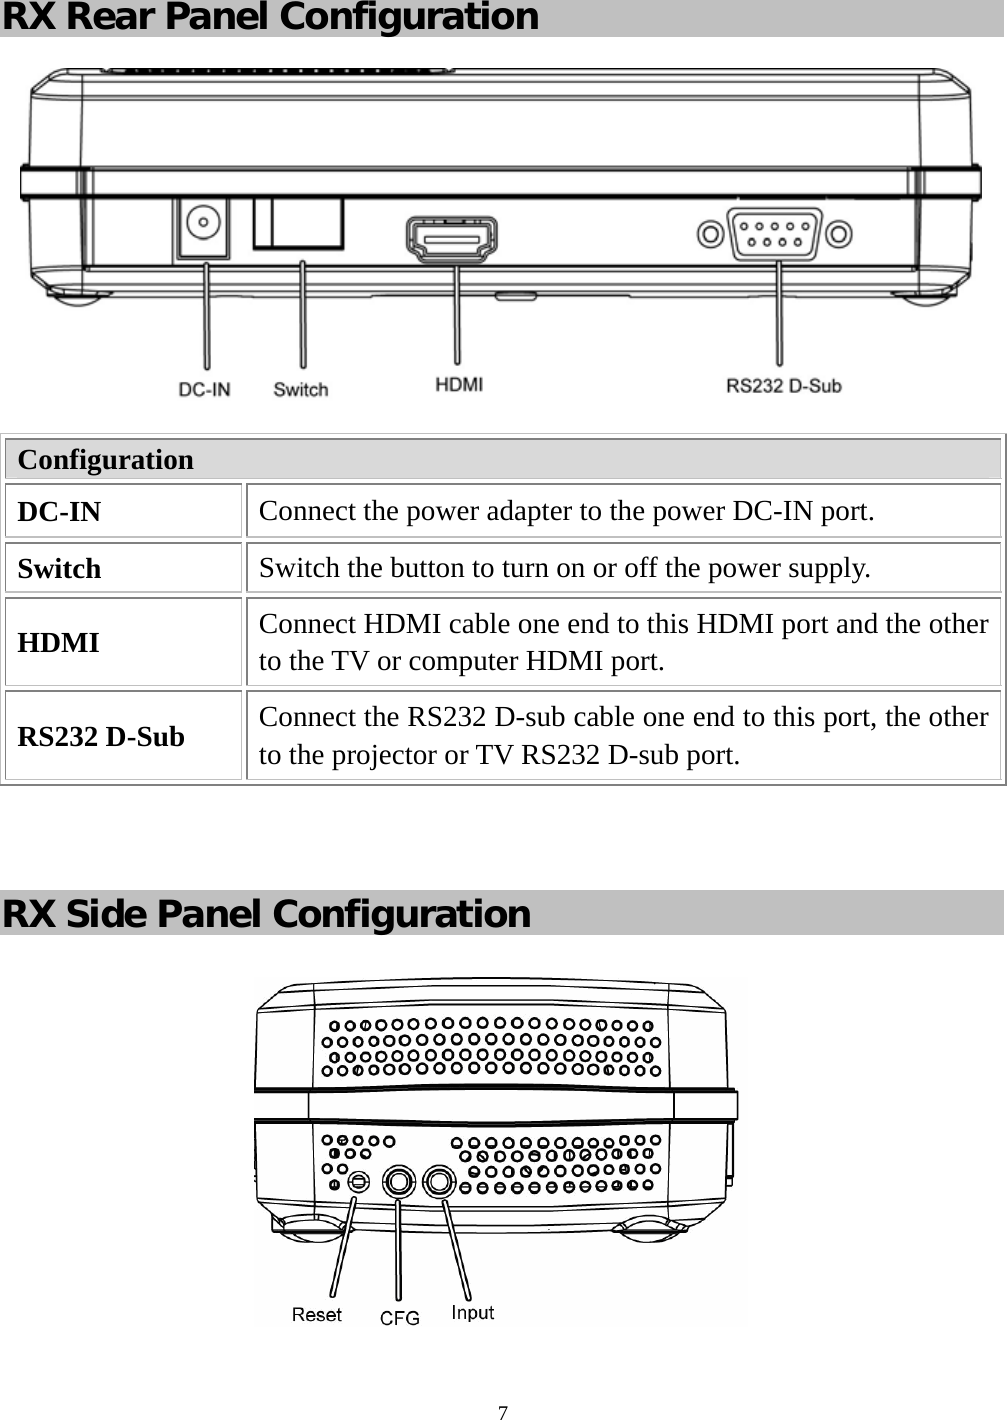  7 RX Rear Panel Configuration  Configuration DC-IN  Connect the power adapter to the power DC-IN port. Switch  Switch the button to turn on or off the power supply. HDMI  Connect HDMI cable one end to this HDMI port and the other to the TV or computer HDMI port. RS232 D-Sub  Connect the RS232 D-sub cable one end to this port, the other to the projector or TV RS232 D-sub port.   RX Side Panel Configuration  